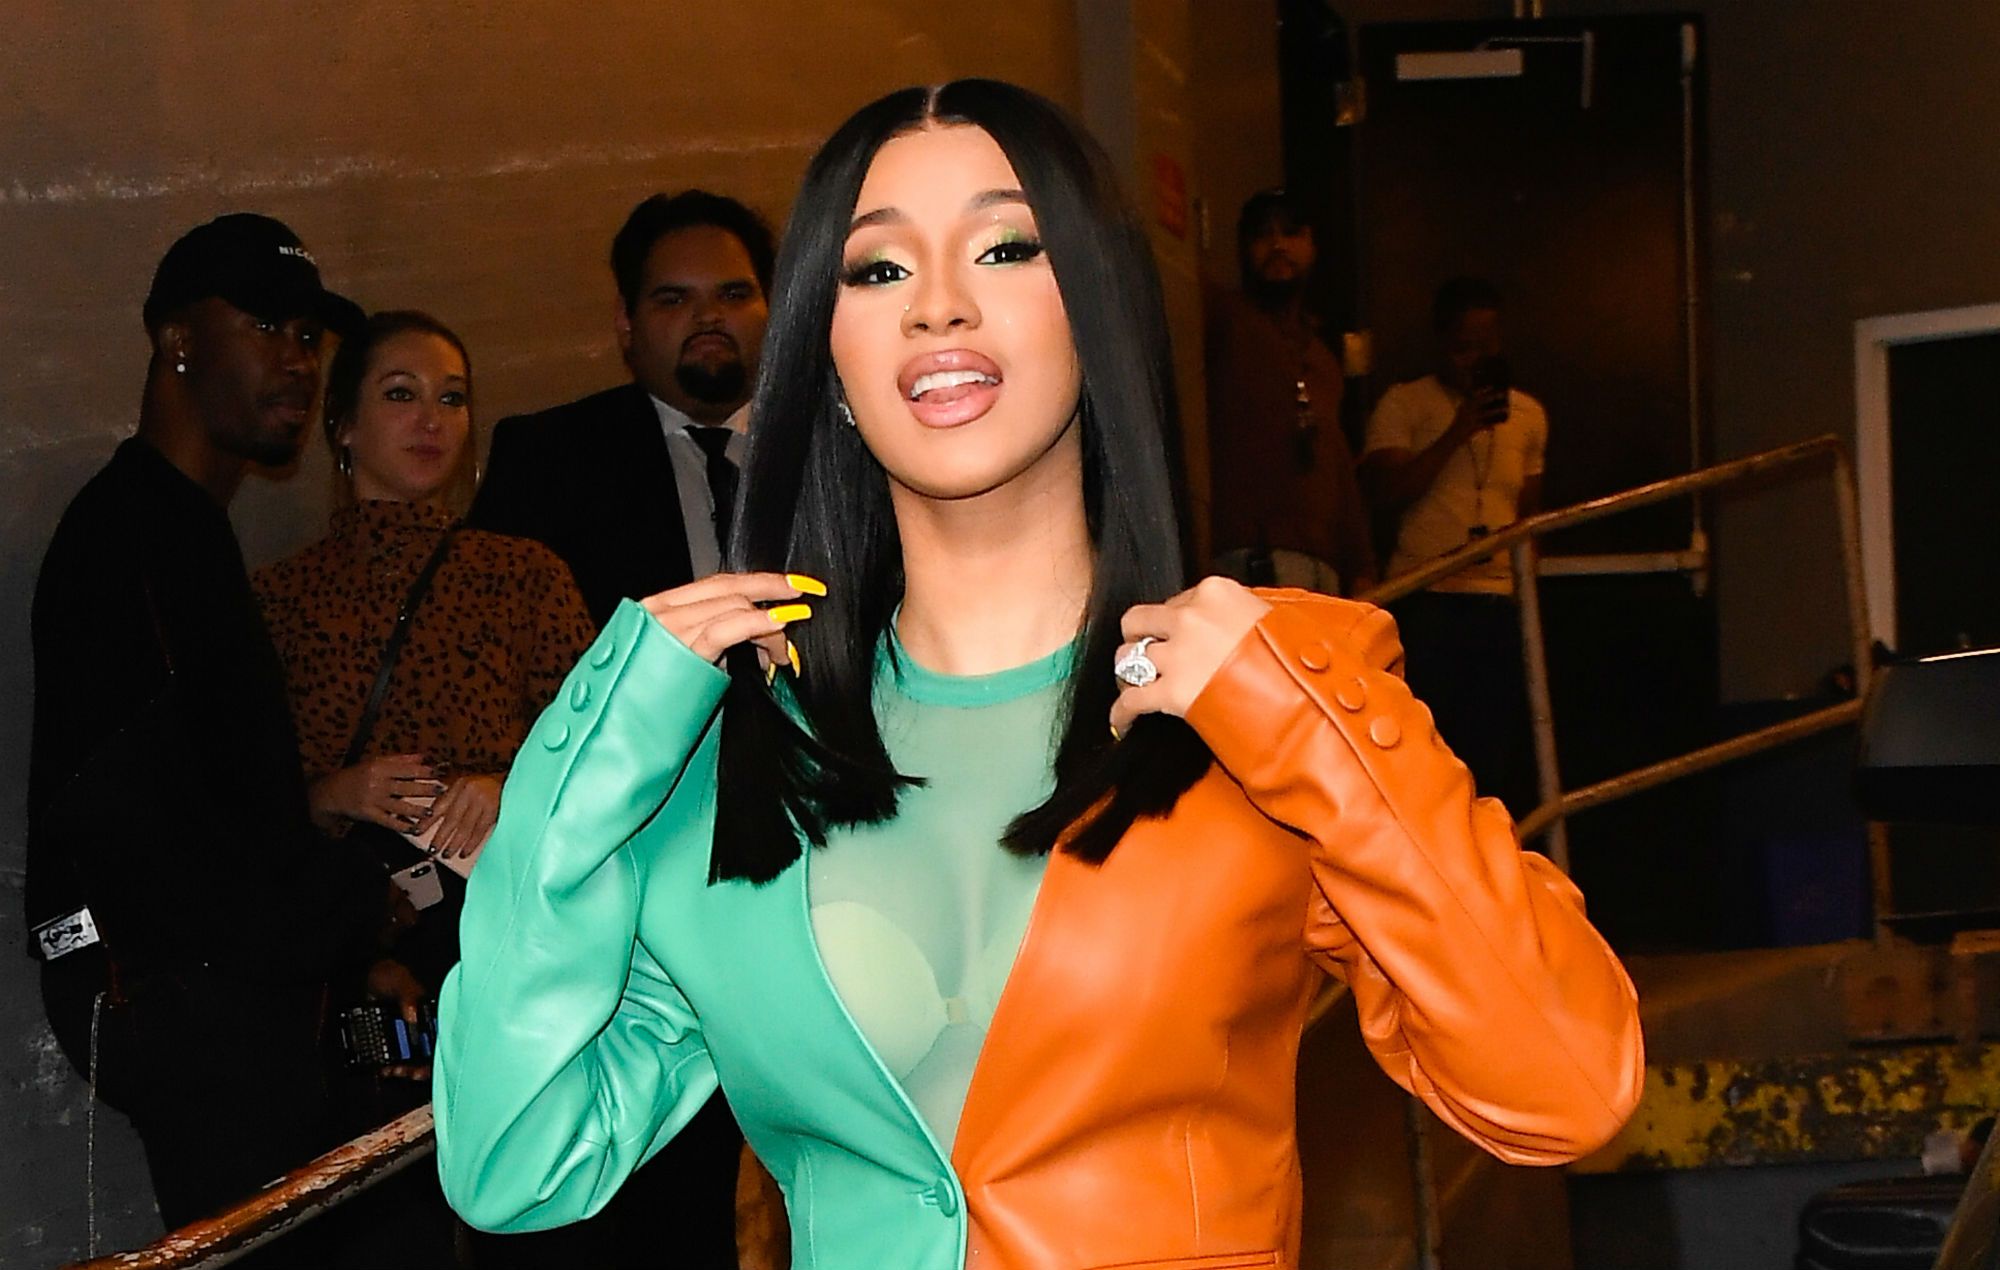 Cardi B hits out at claims she was used as pawn for Biden support in U.S. election